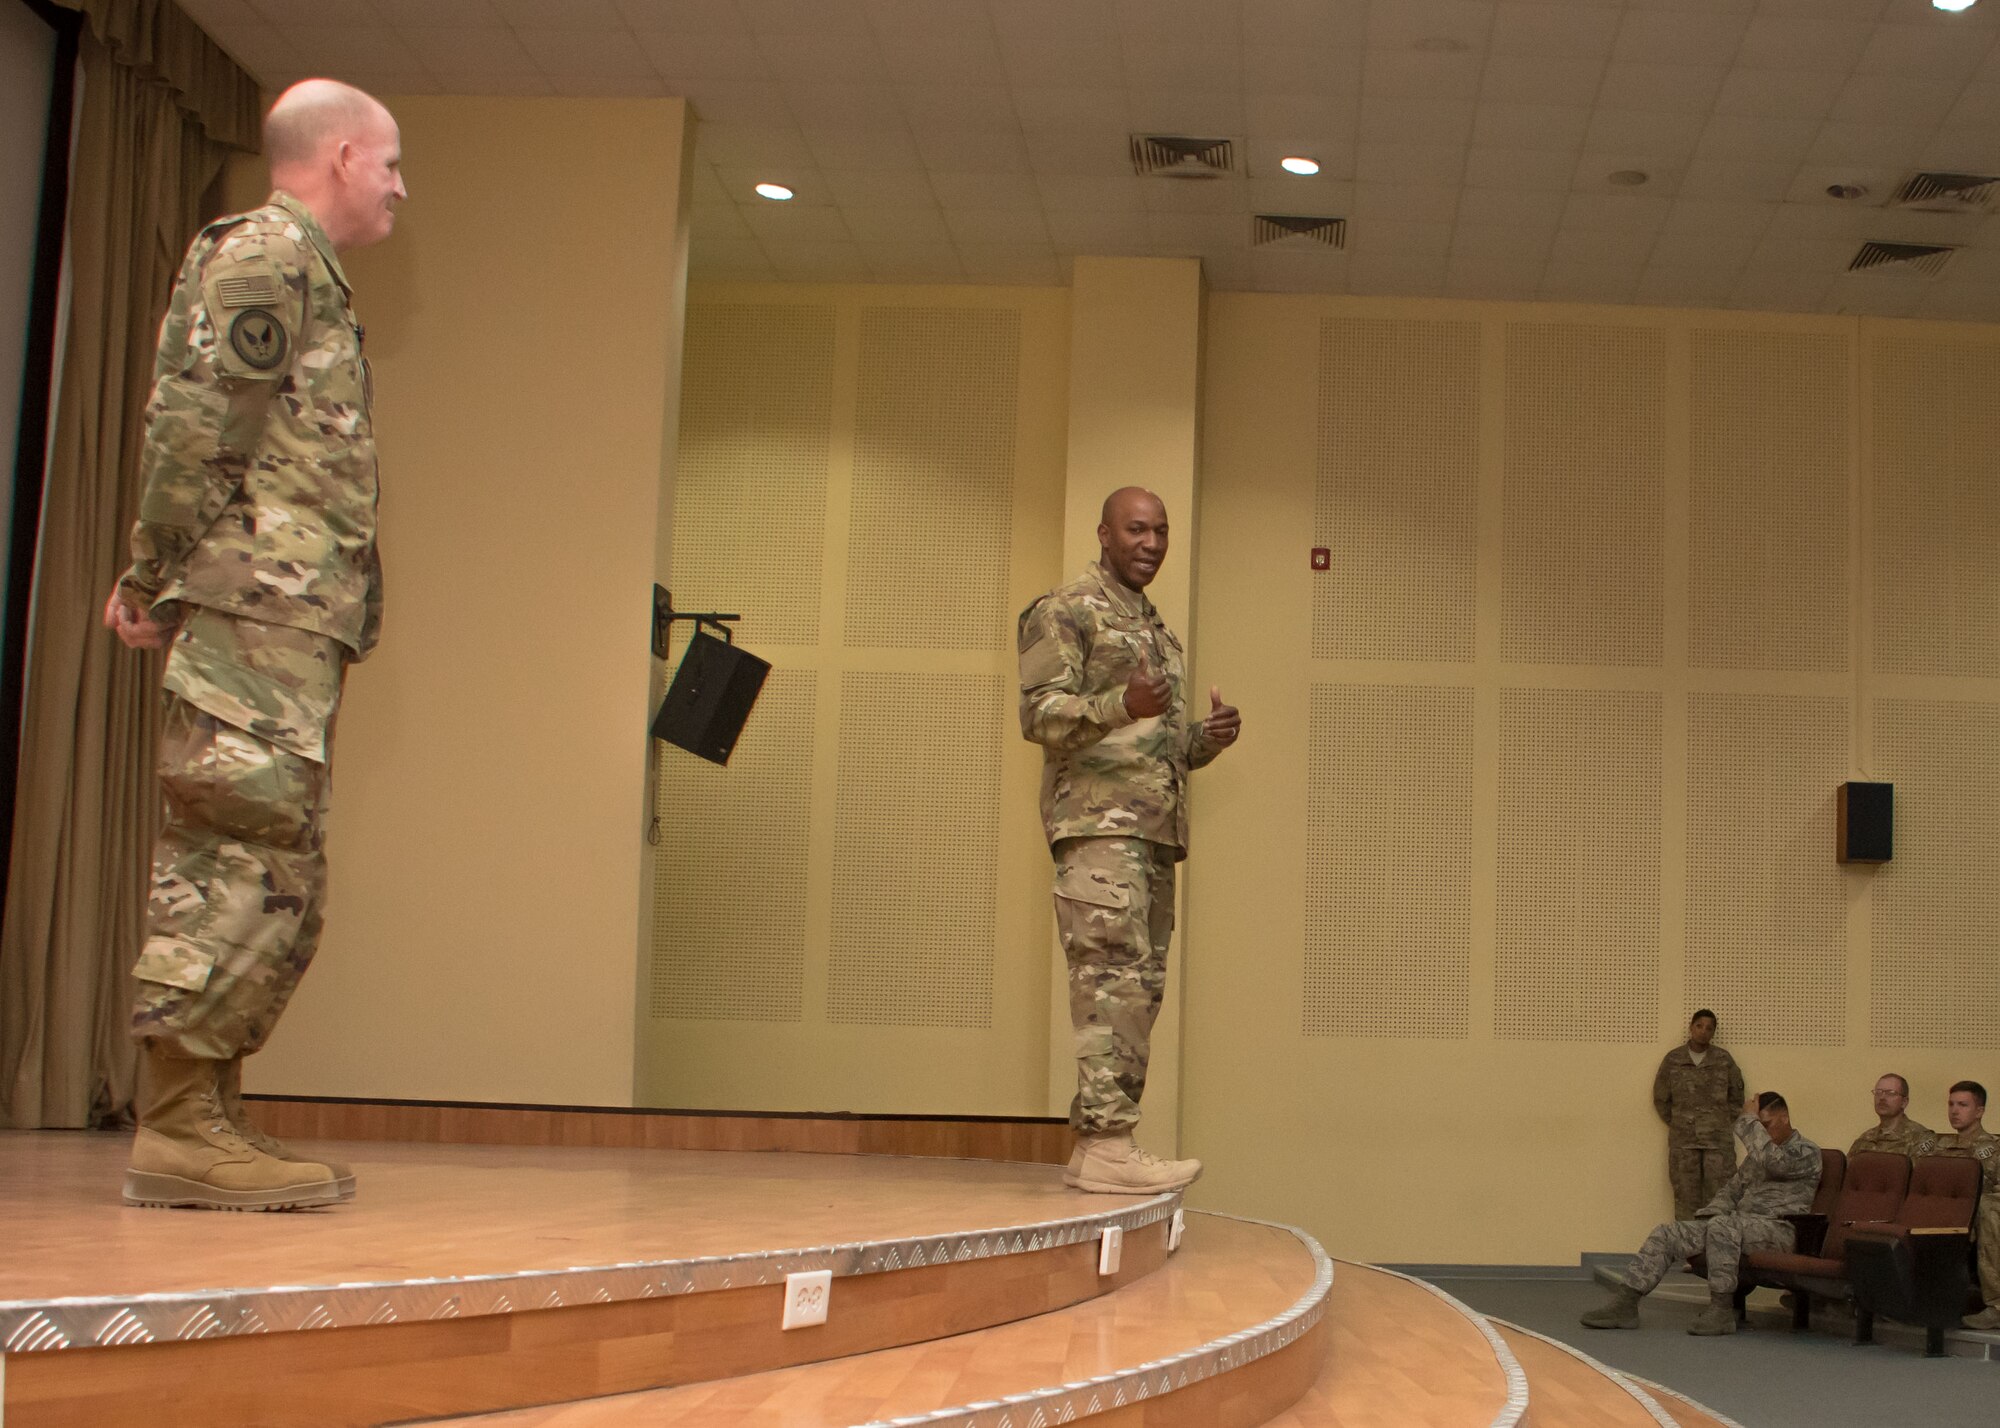 Vice Chief of Staff of the Air Force, Gen. Stephen W. Wilson, left, and Chief Master Sergeant of the Air Force Kaleth O. Wright address an audience of Airmen during an all call at an undisclosed location in Southwest Asia April 9, 2017. They held an all call during their visit and discussed priorities for improving Airmen’s lives. (U.S. Air Force photo/Staff Sgt. Andrew Park)